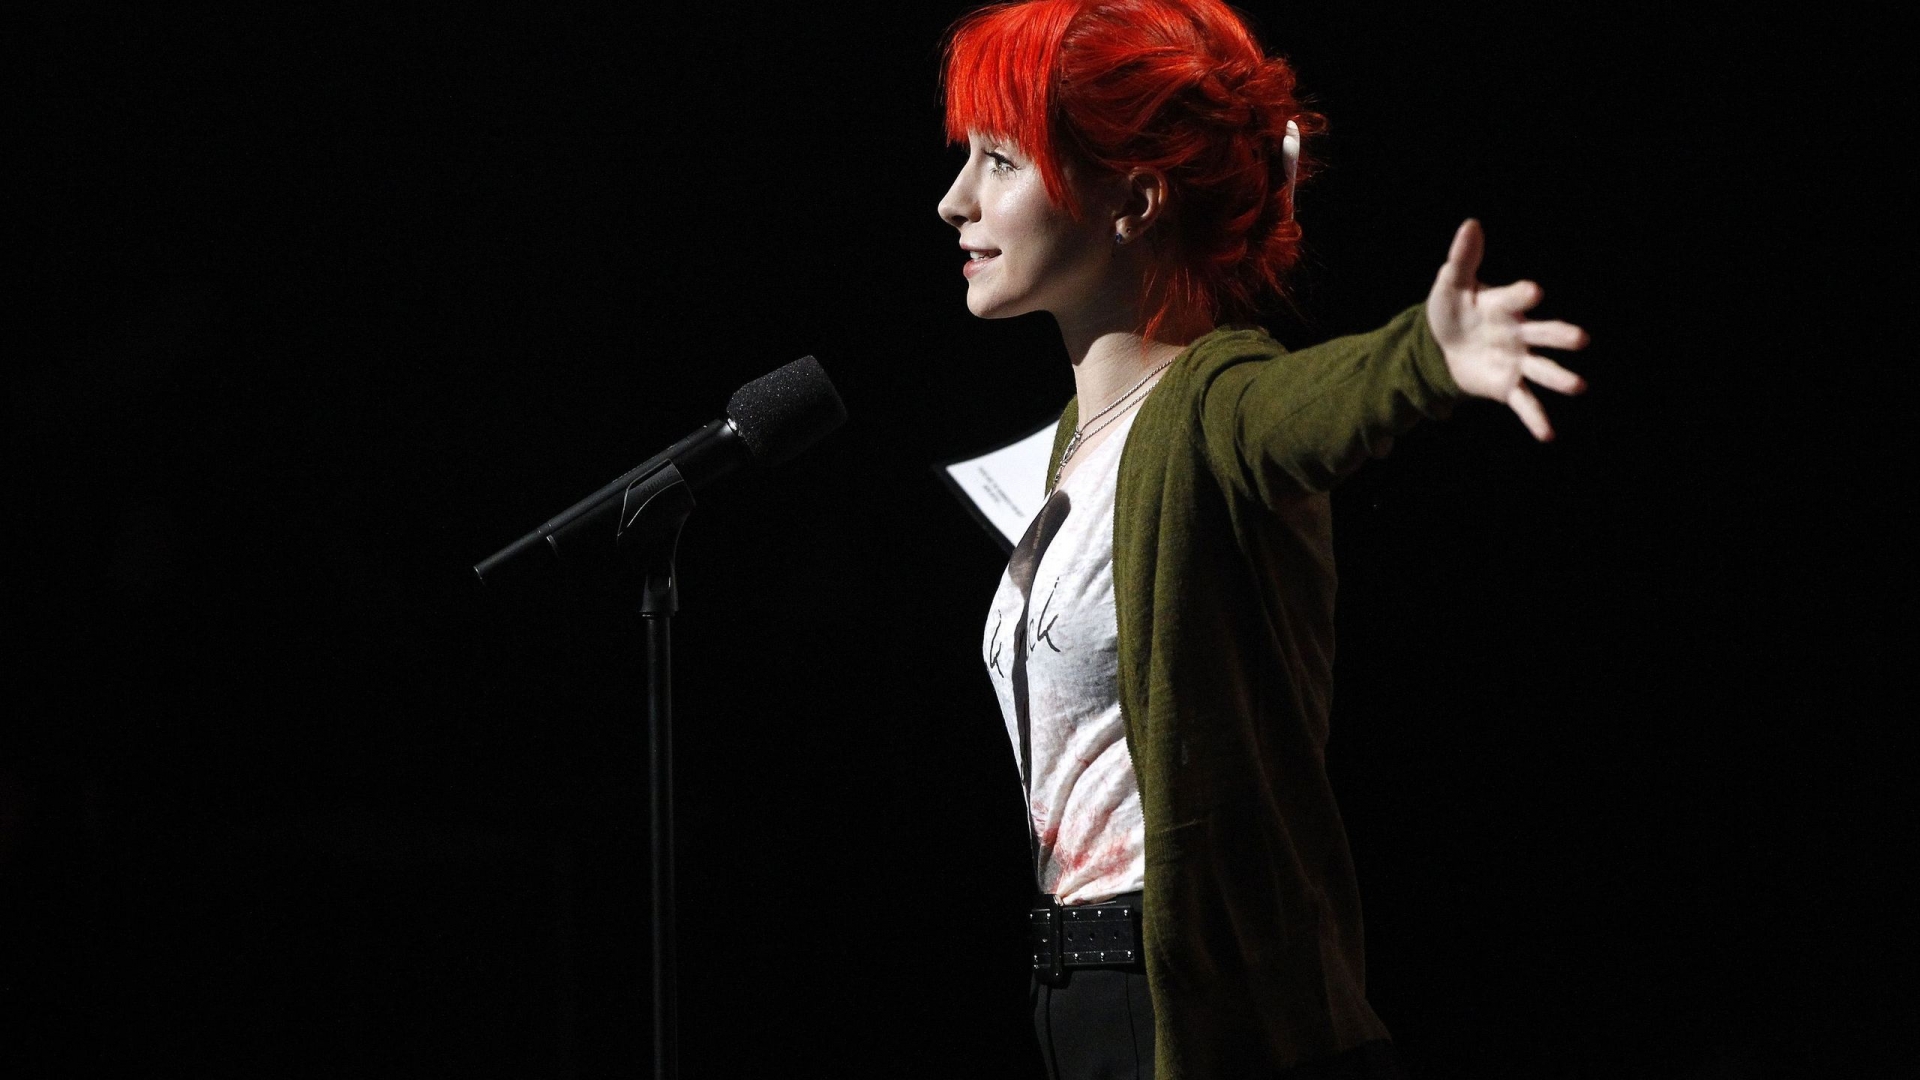 Hayley Williams Smile for 1920 x 1080 HDTV 1080p resolution